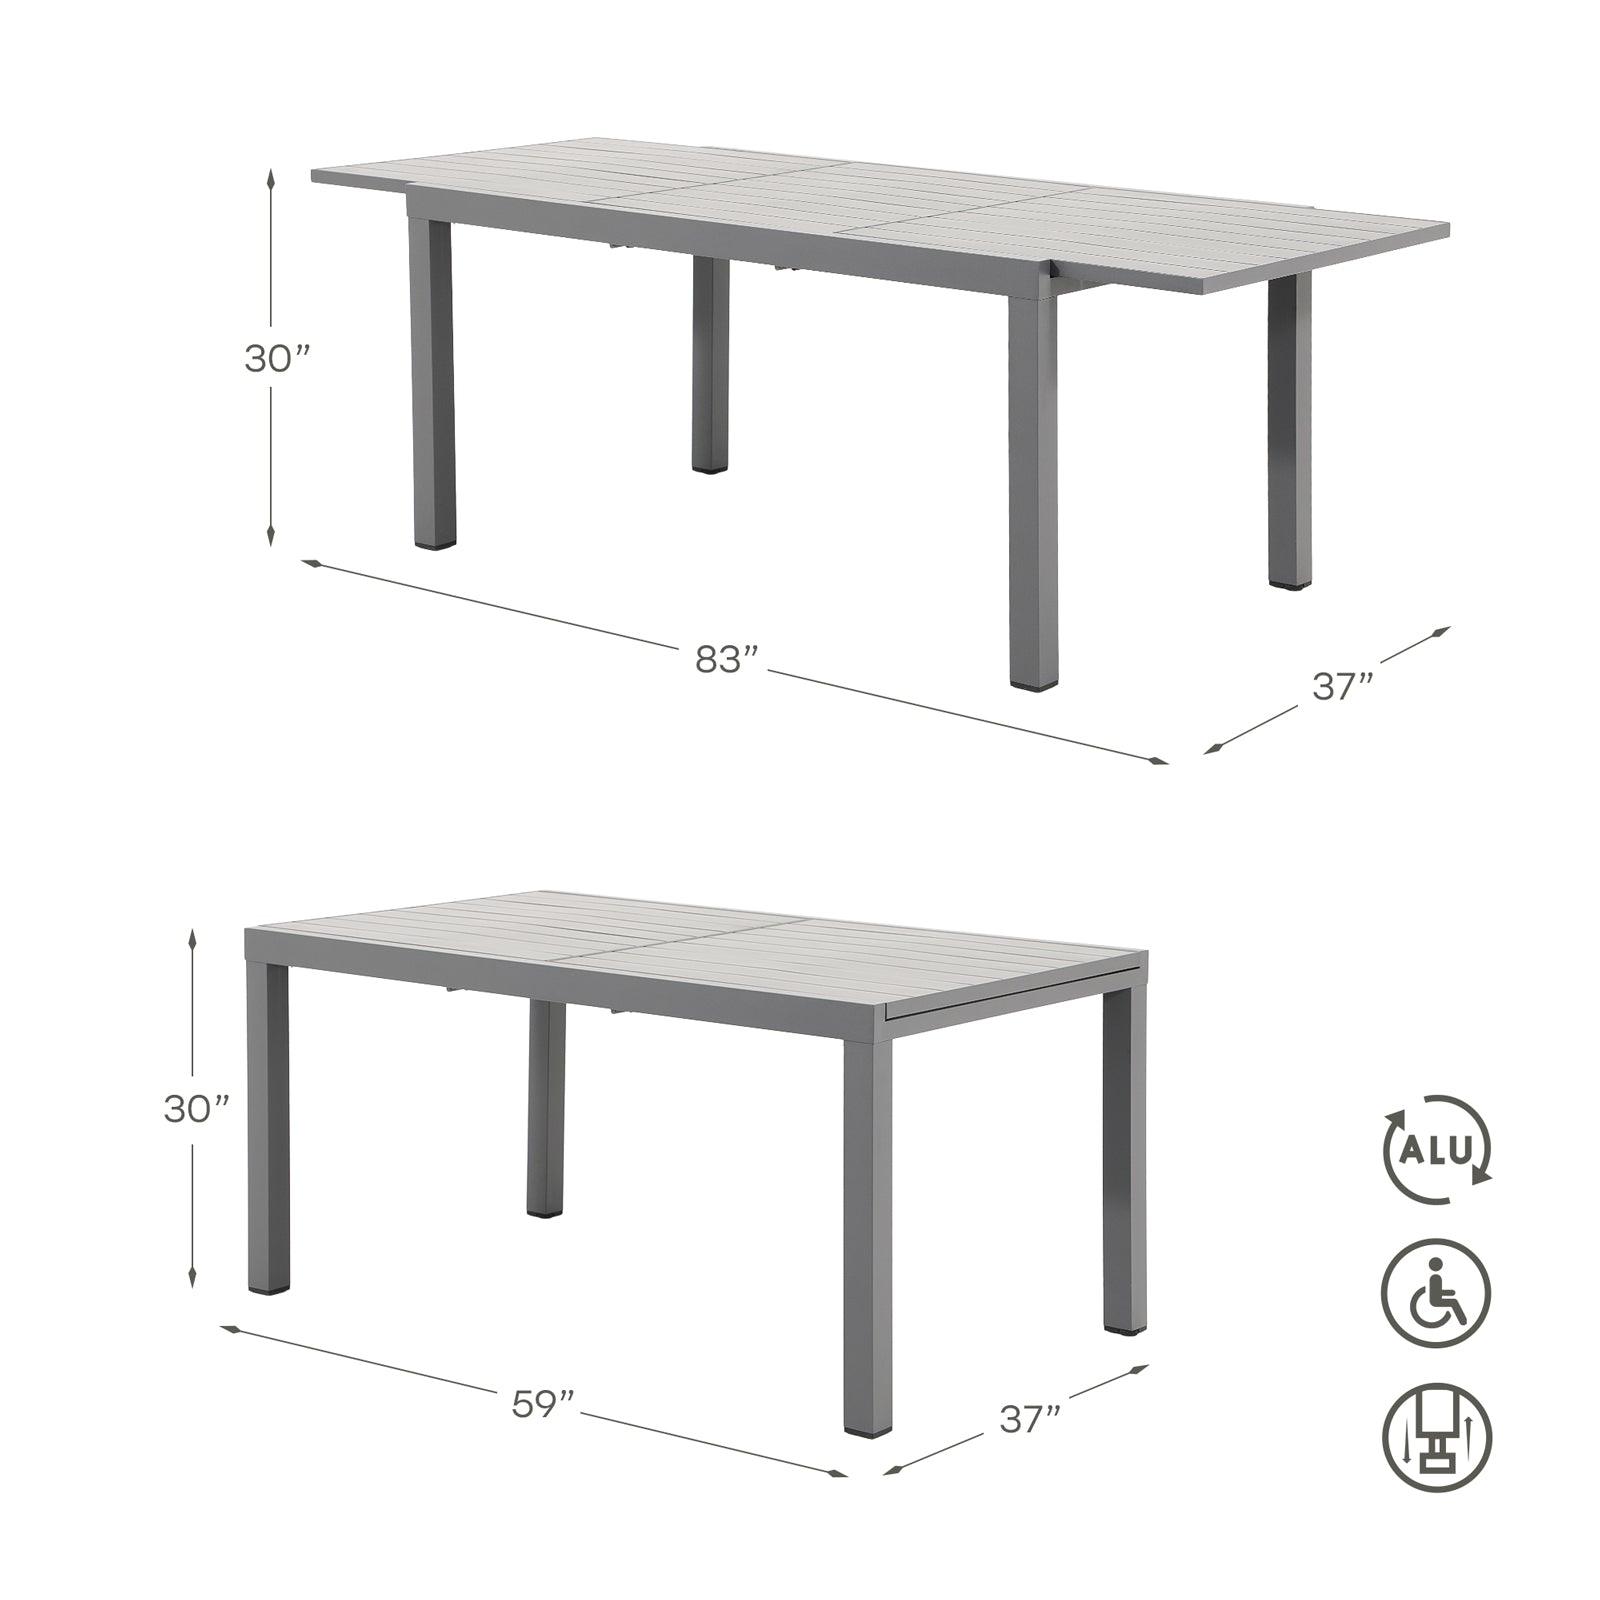 Aluminum frame dining table with extension deisgn, Dimension info- Jardina Furniture